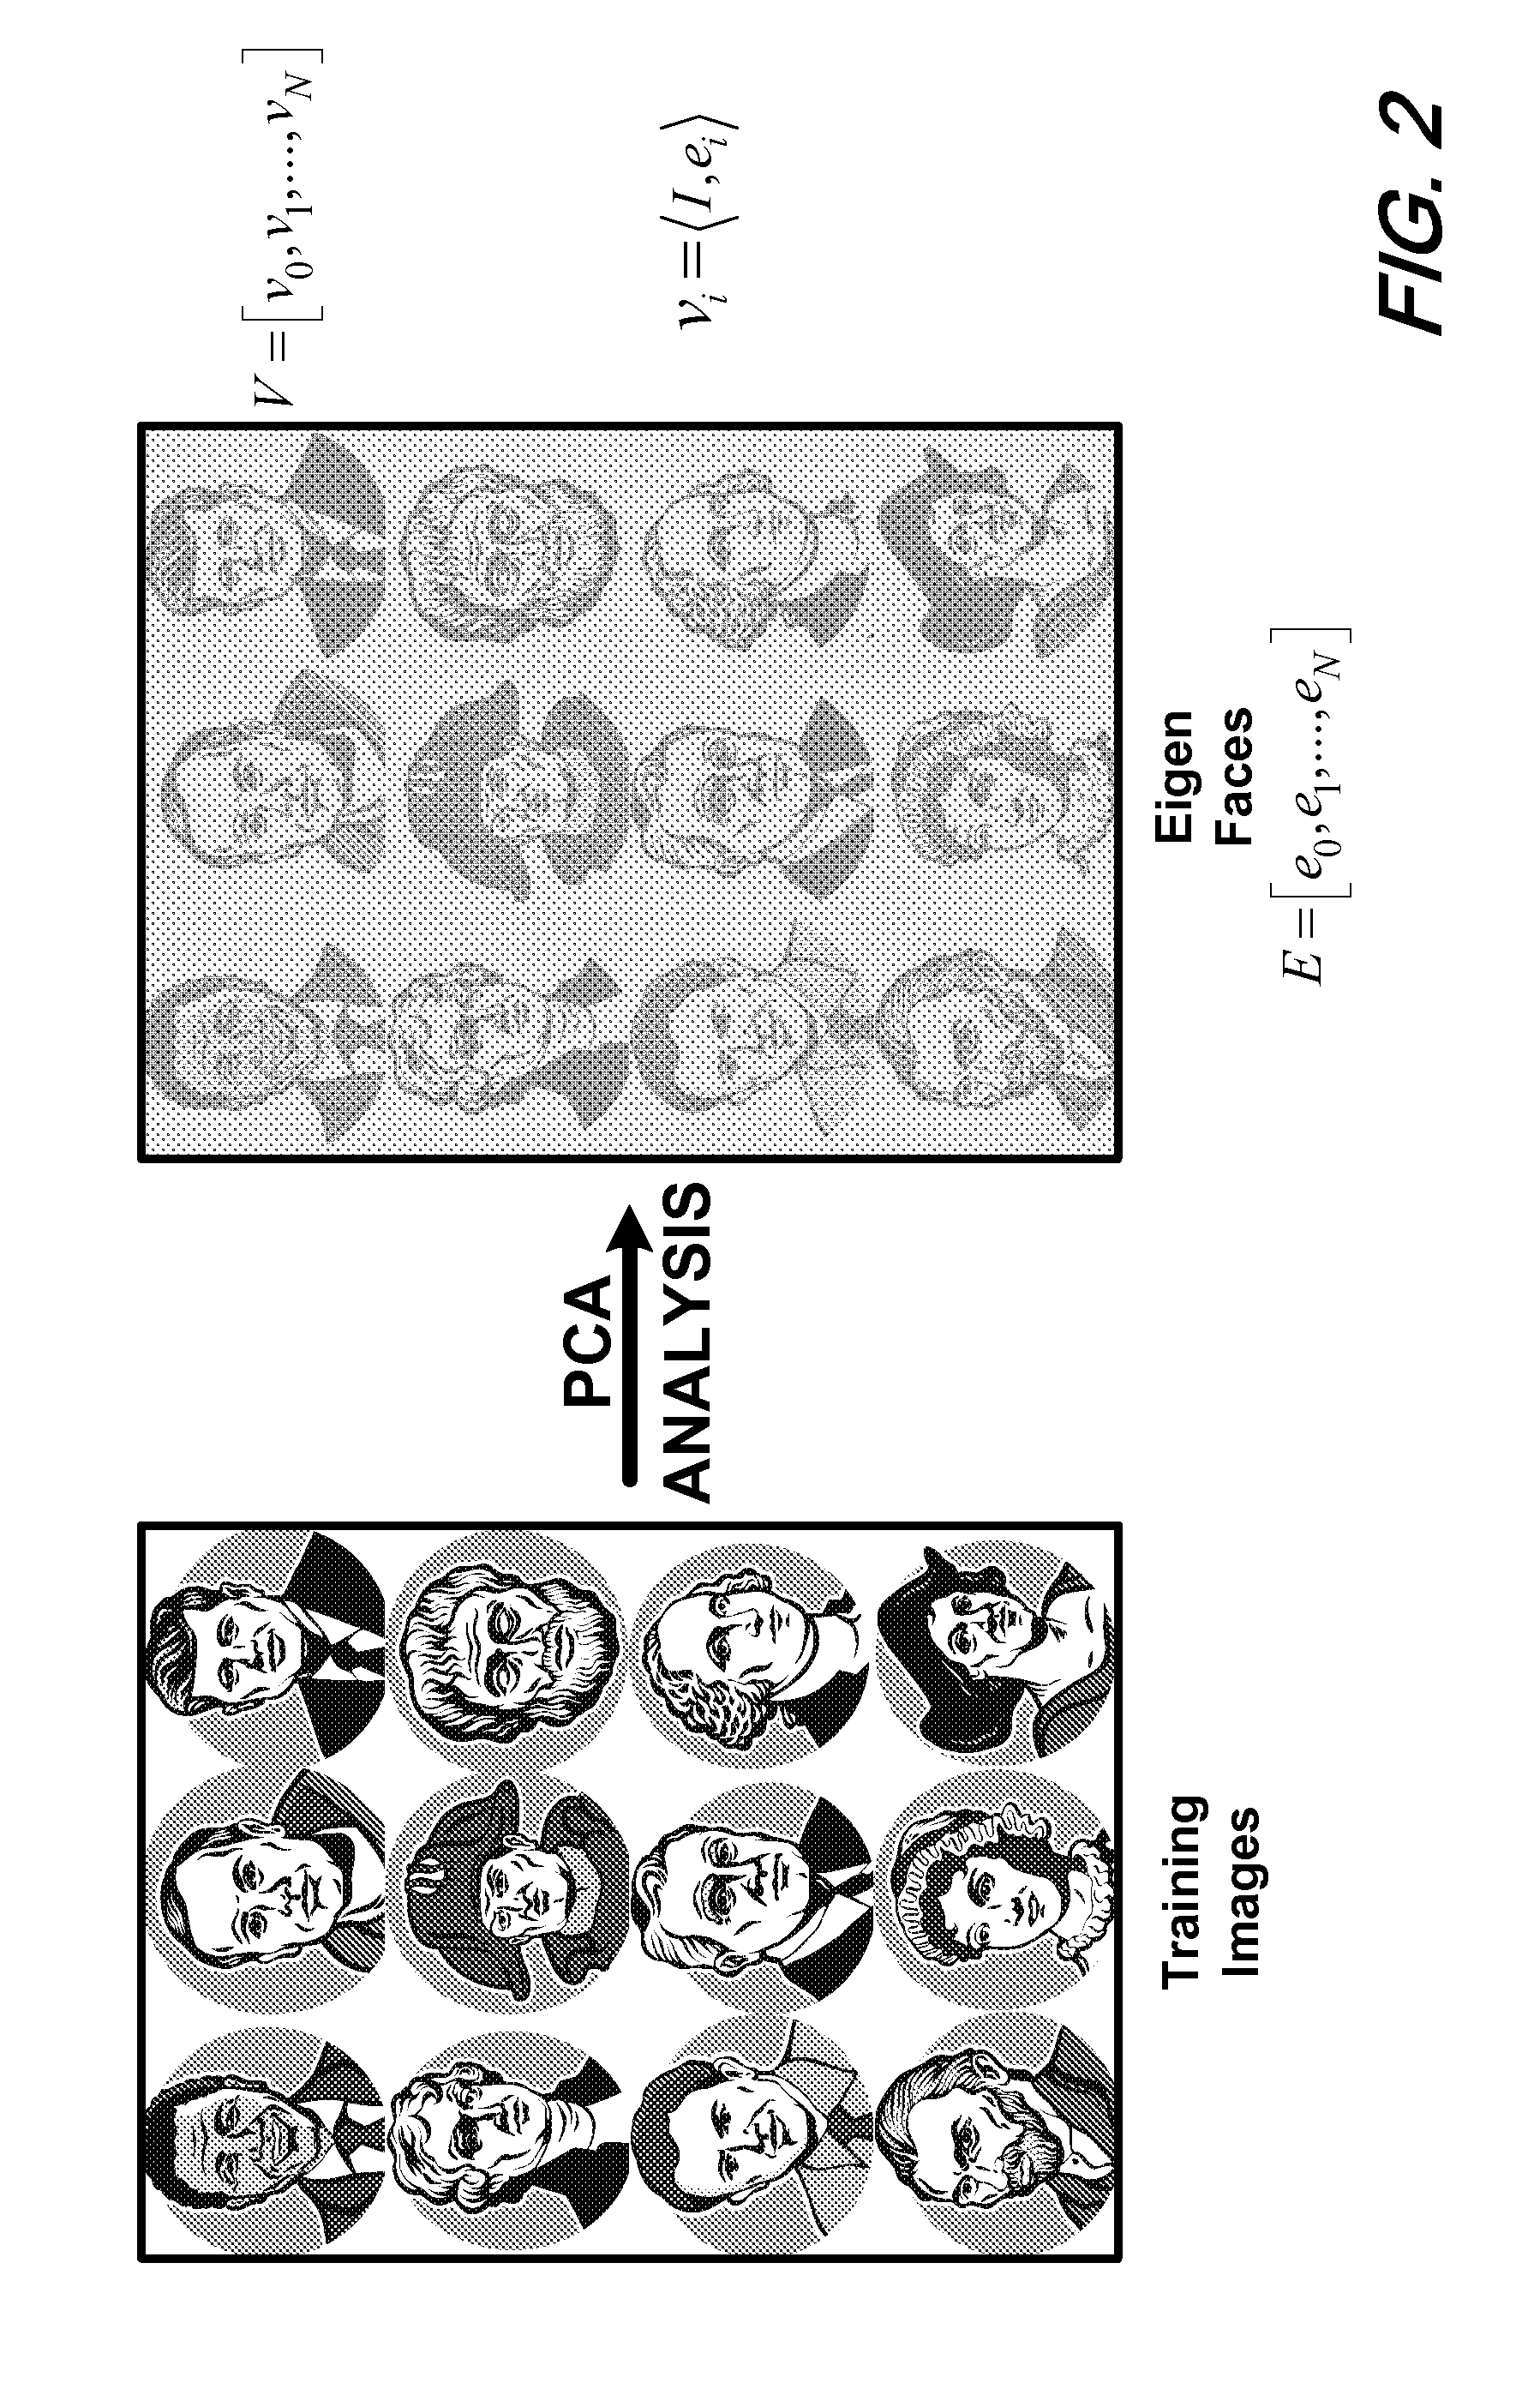 Digital watermarking of picture identity documents using Eigenface vectors of Eigenface facial features of the document facial image as the watermark key